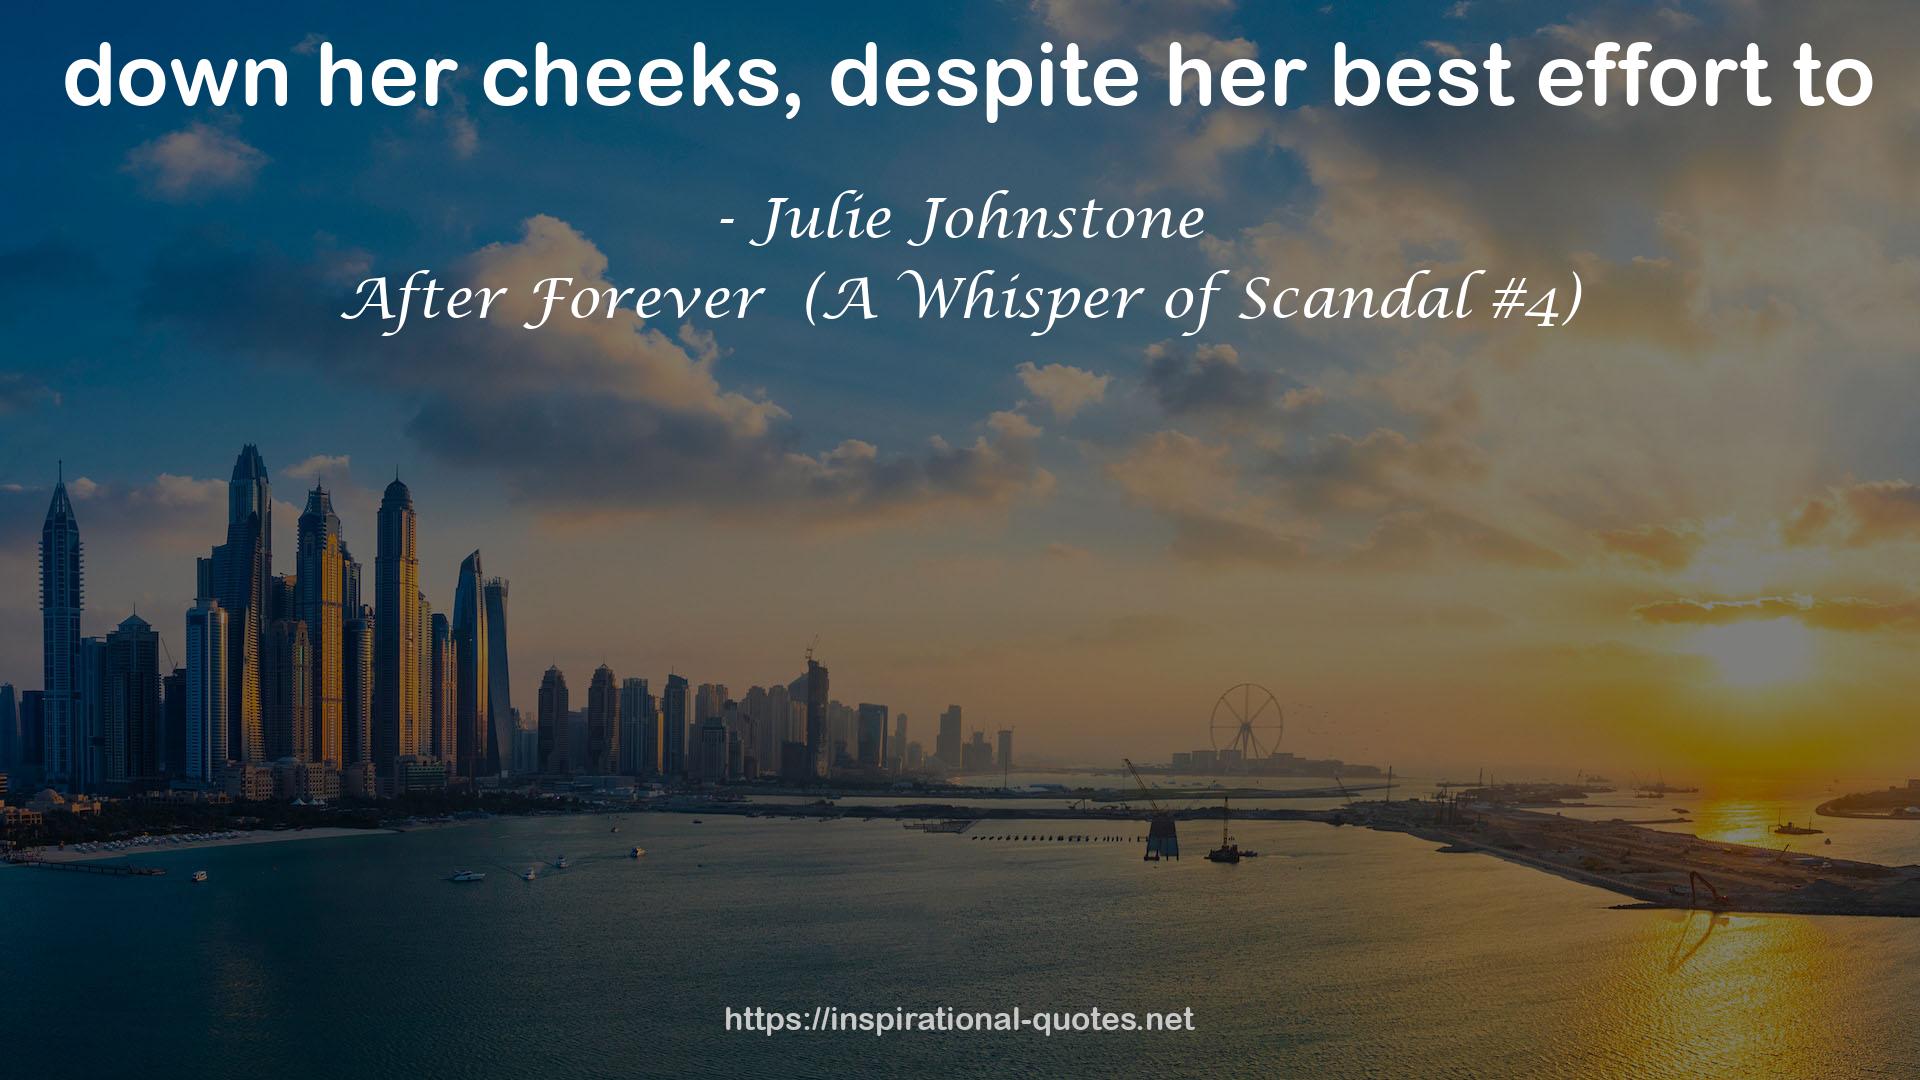 After Forever  (A Whisper of Scandal #4) QUOTES